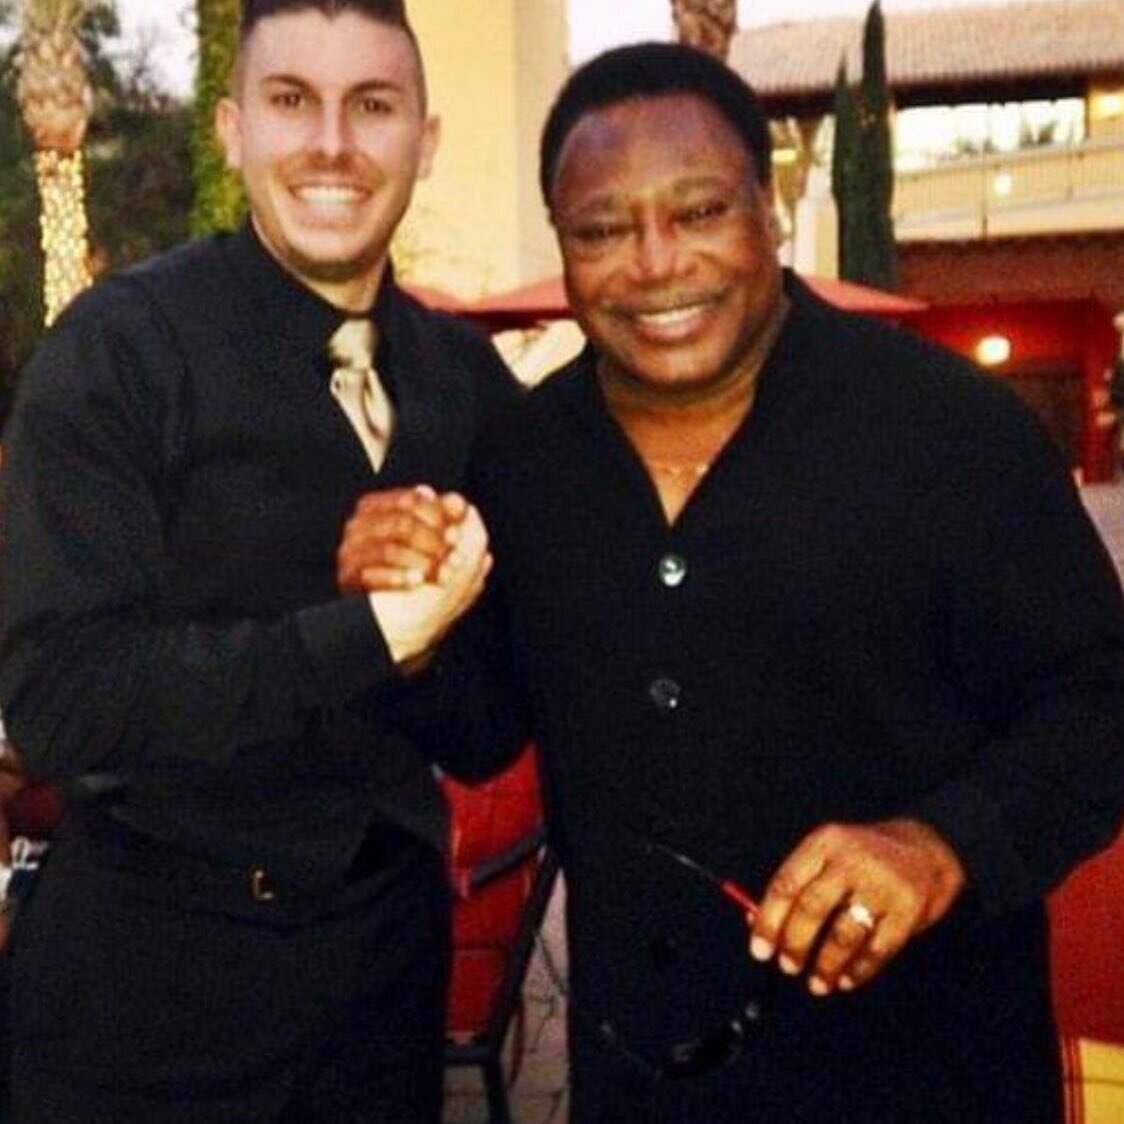 #tbt I was humbled to have the great George Benson come to my show at Montelucia in Paradise Valley, AZ. He was fascinated by the flamenco guitar technique and asked me to show him a snippet during my session break. 
.
.
.
#alexhristovmusic #youngsla